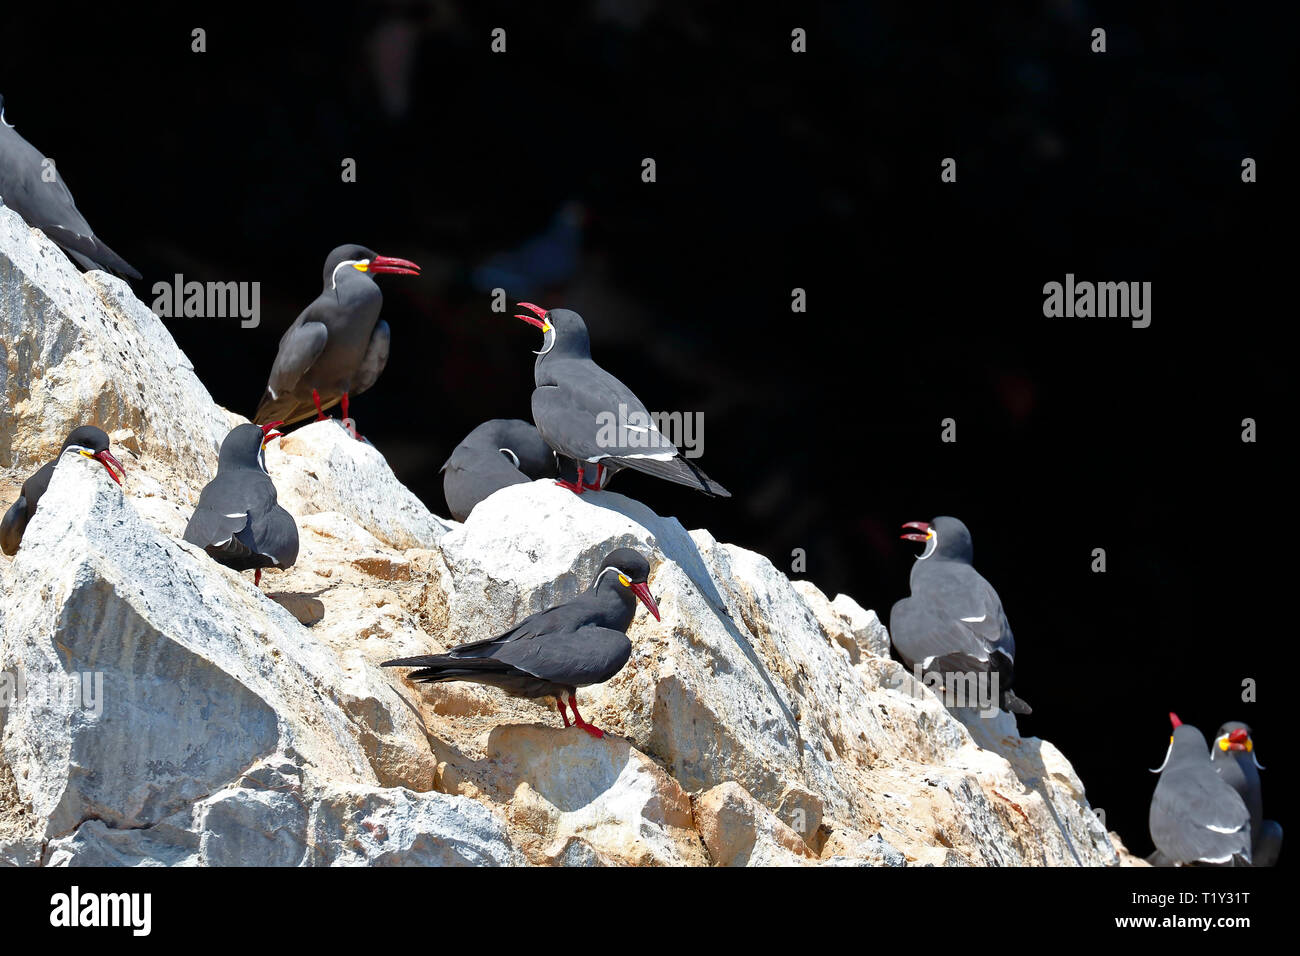 Group of Inca tern (Larosterna inca) perched in freedom on a rocky boulder of the Ballestas Islands in Paracas, Peru. Stock Photo